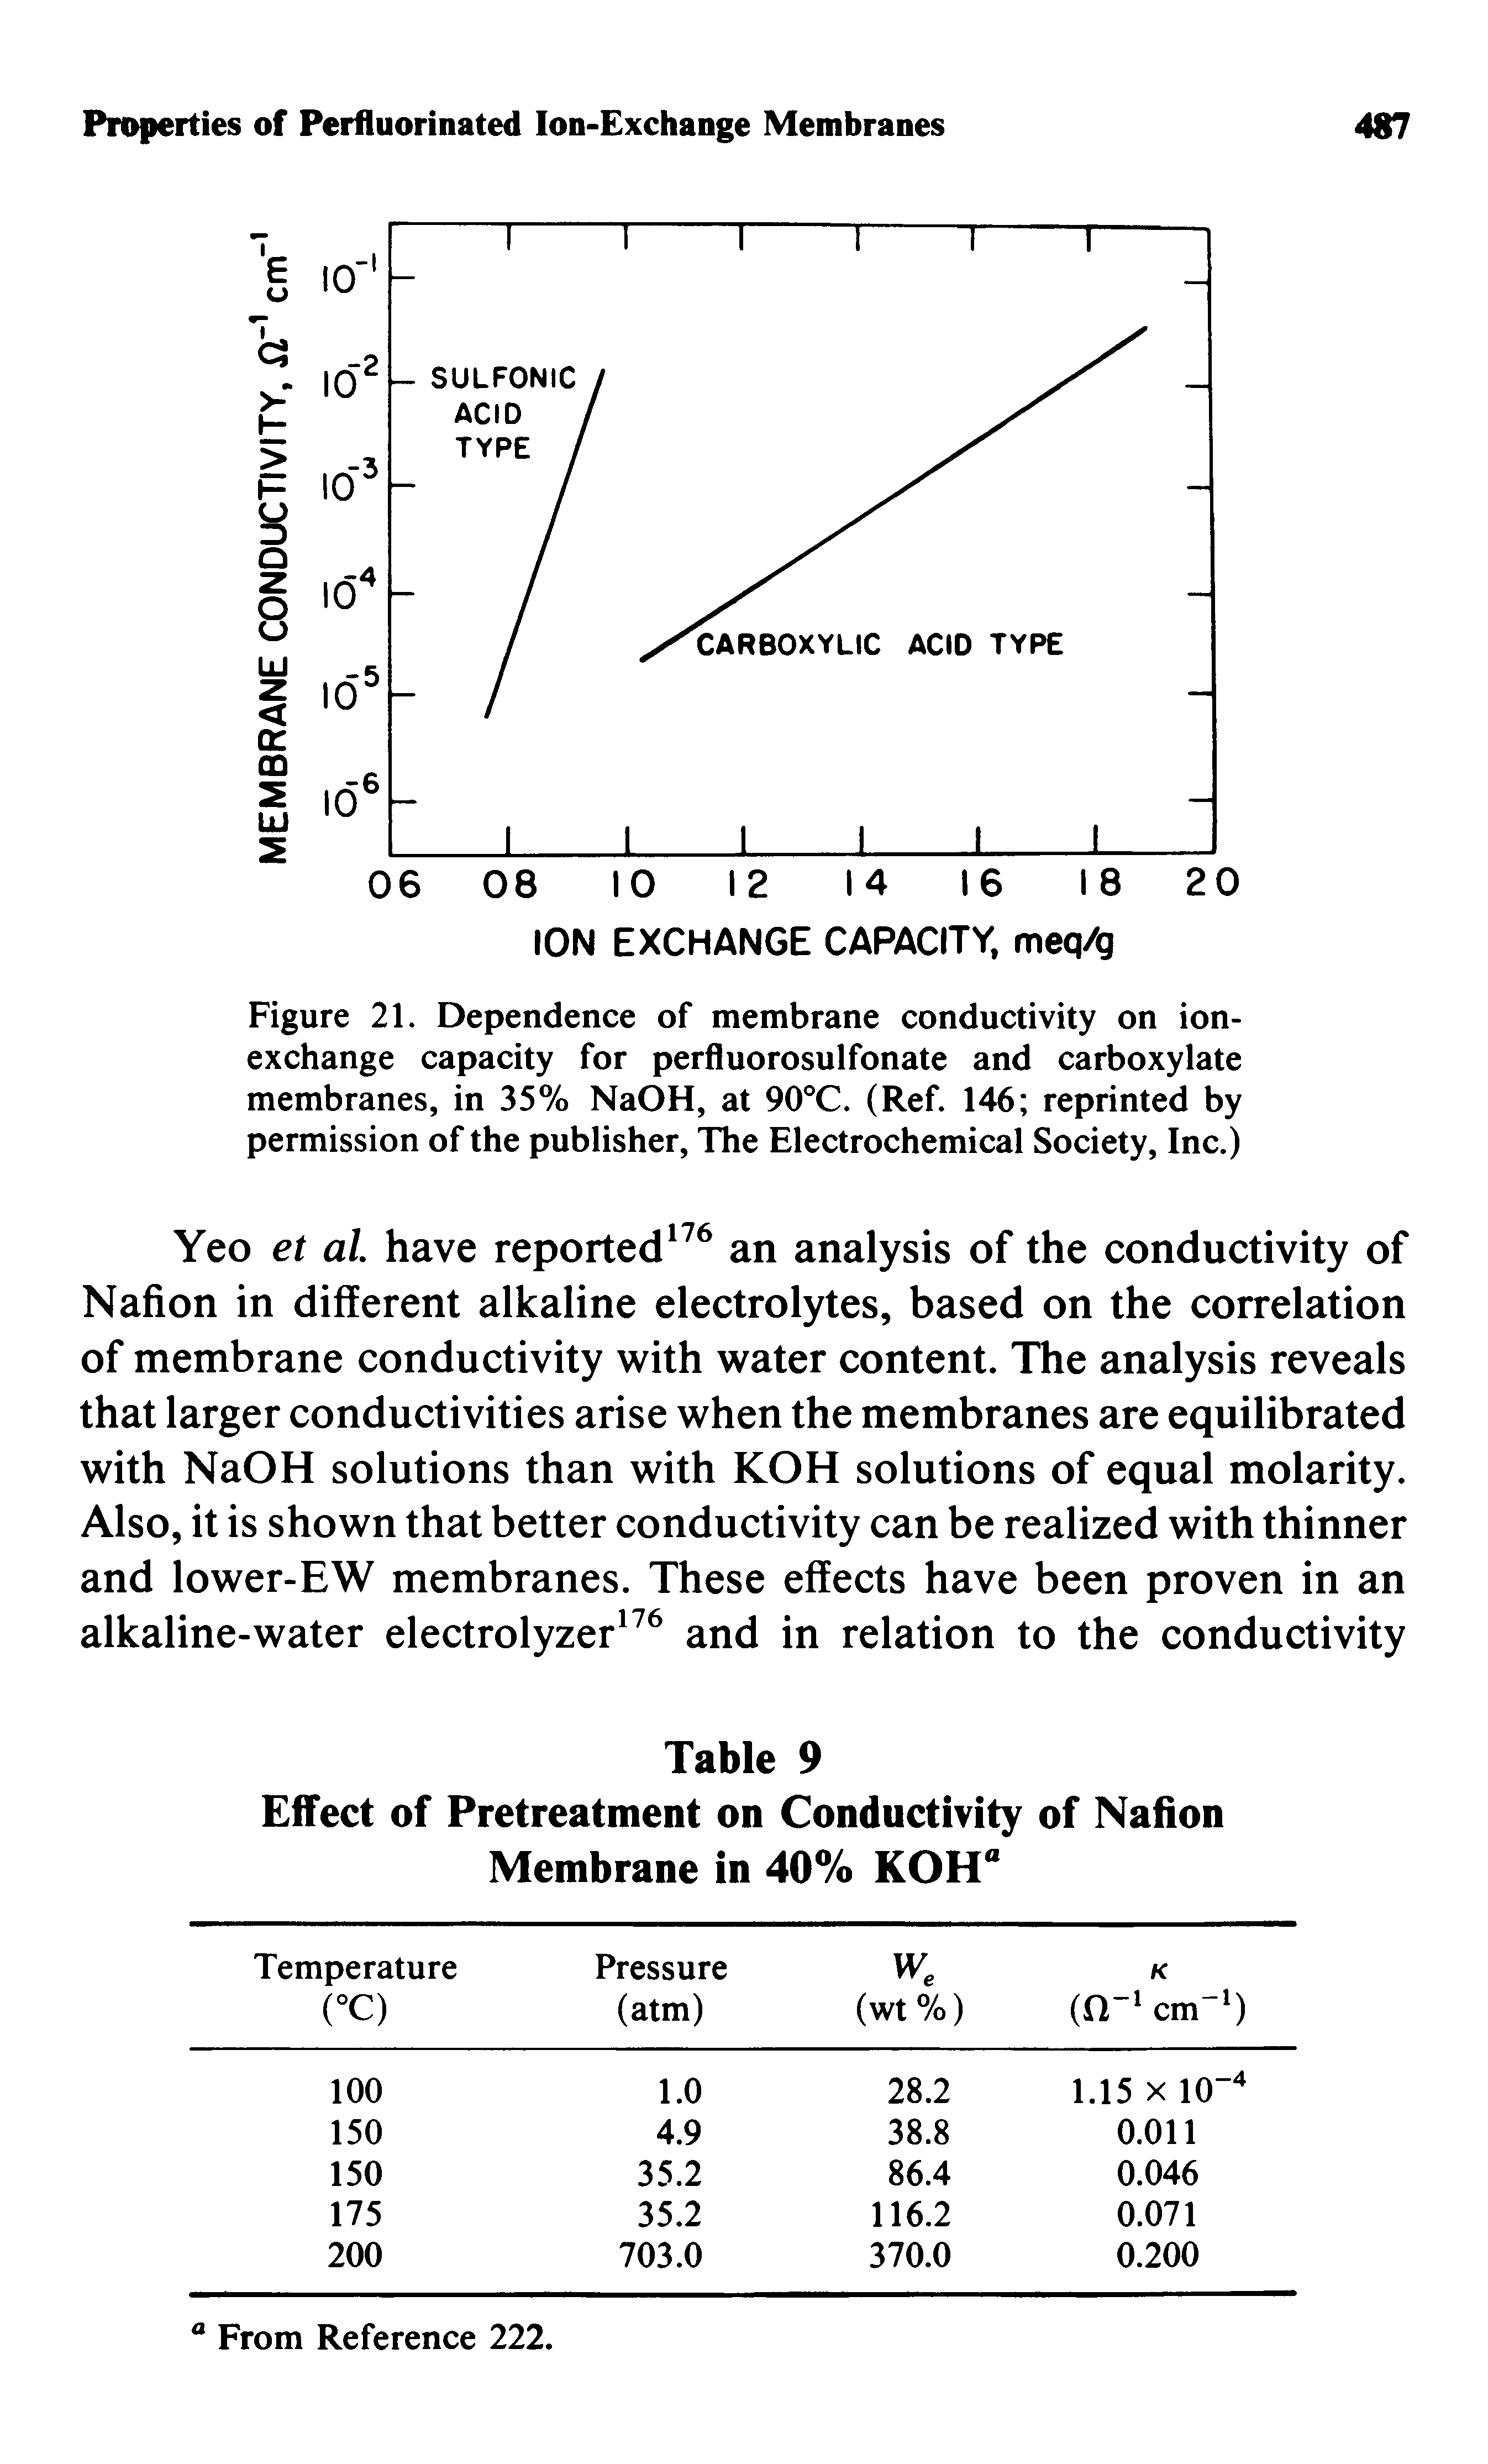 Figure 21. Dependence of membrane conductivity on ion-exchange capacity for perfluorosulfonate and carboxylate membranes, in 35% NaOH, at 90°C. (Ref. 146 reprinted by permission of the publisher, The Electrochemical Society, Inc.)...